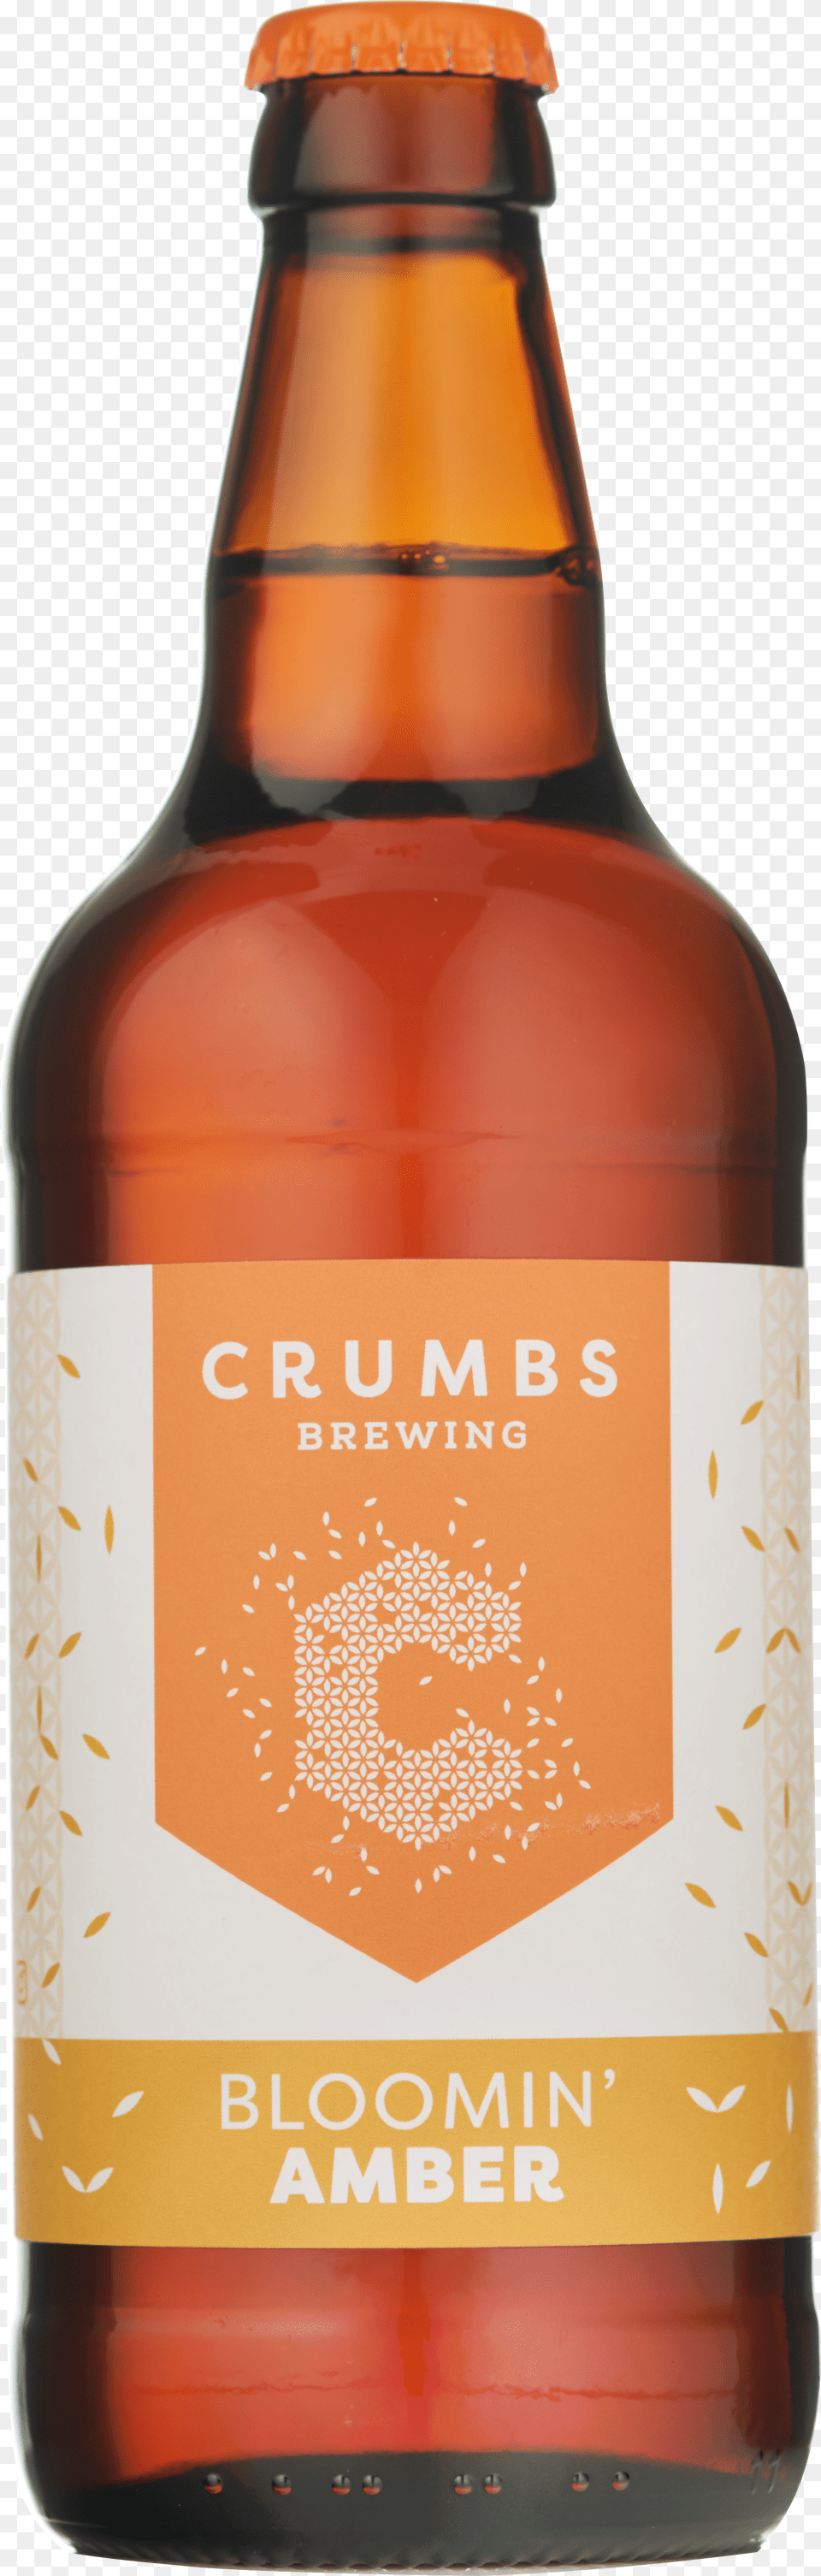 Amber Lager Crumbs Brewery Surrey Englandclass Glass Bottle Free Png